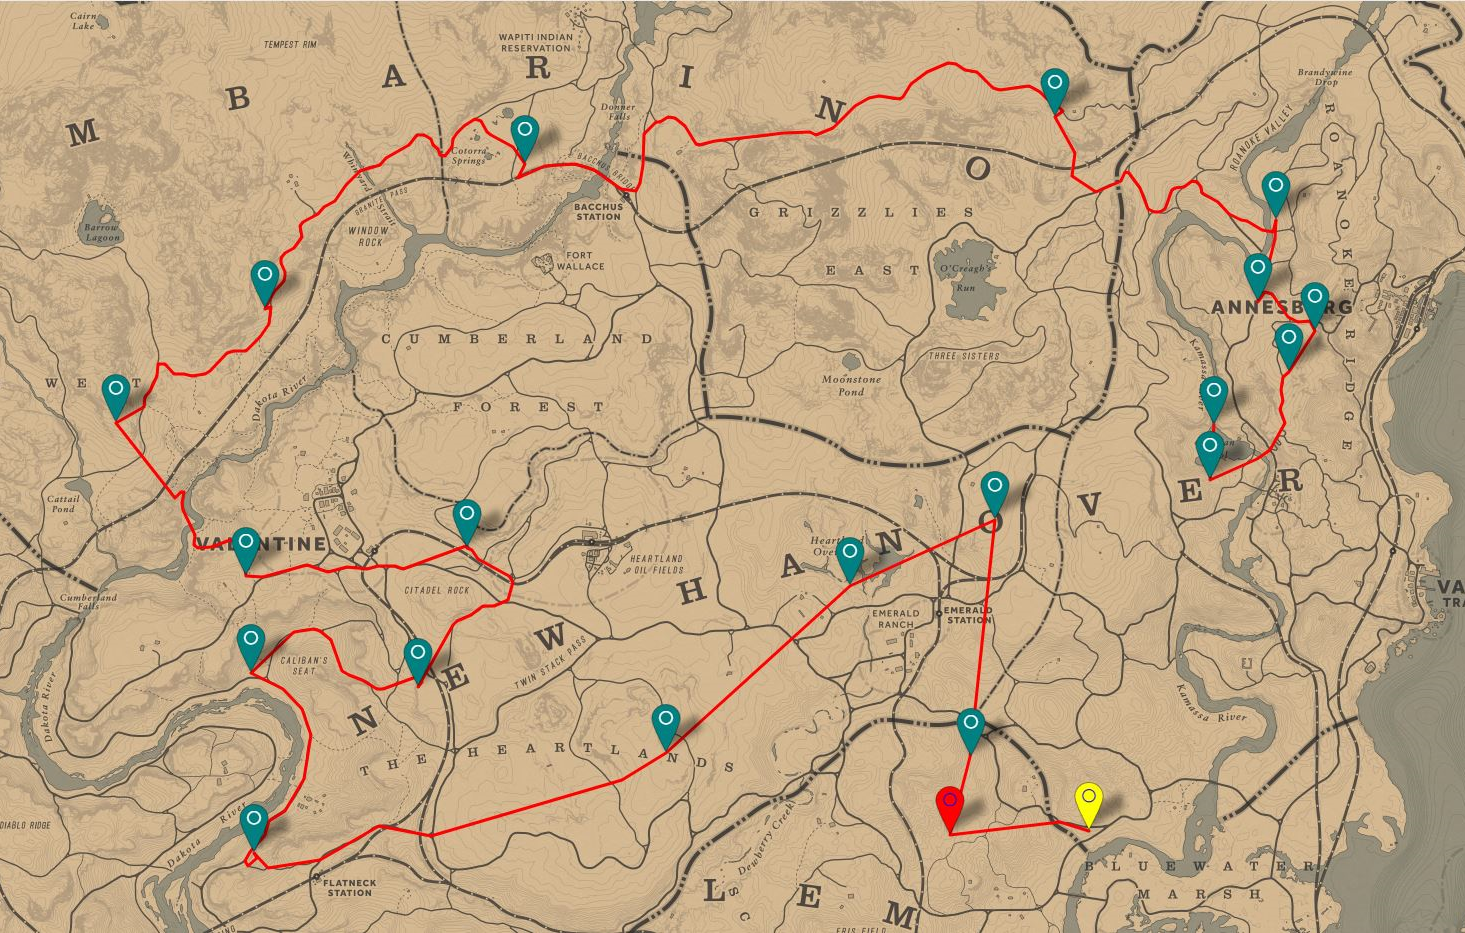 interactive map red dead redemption 2